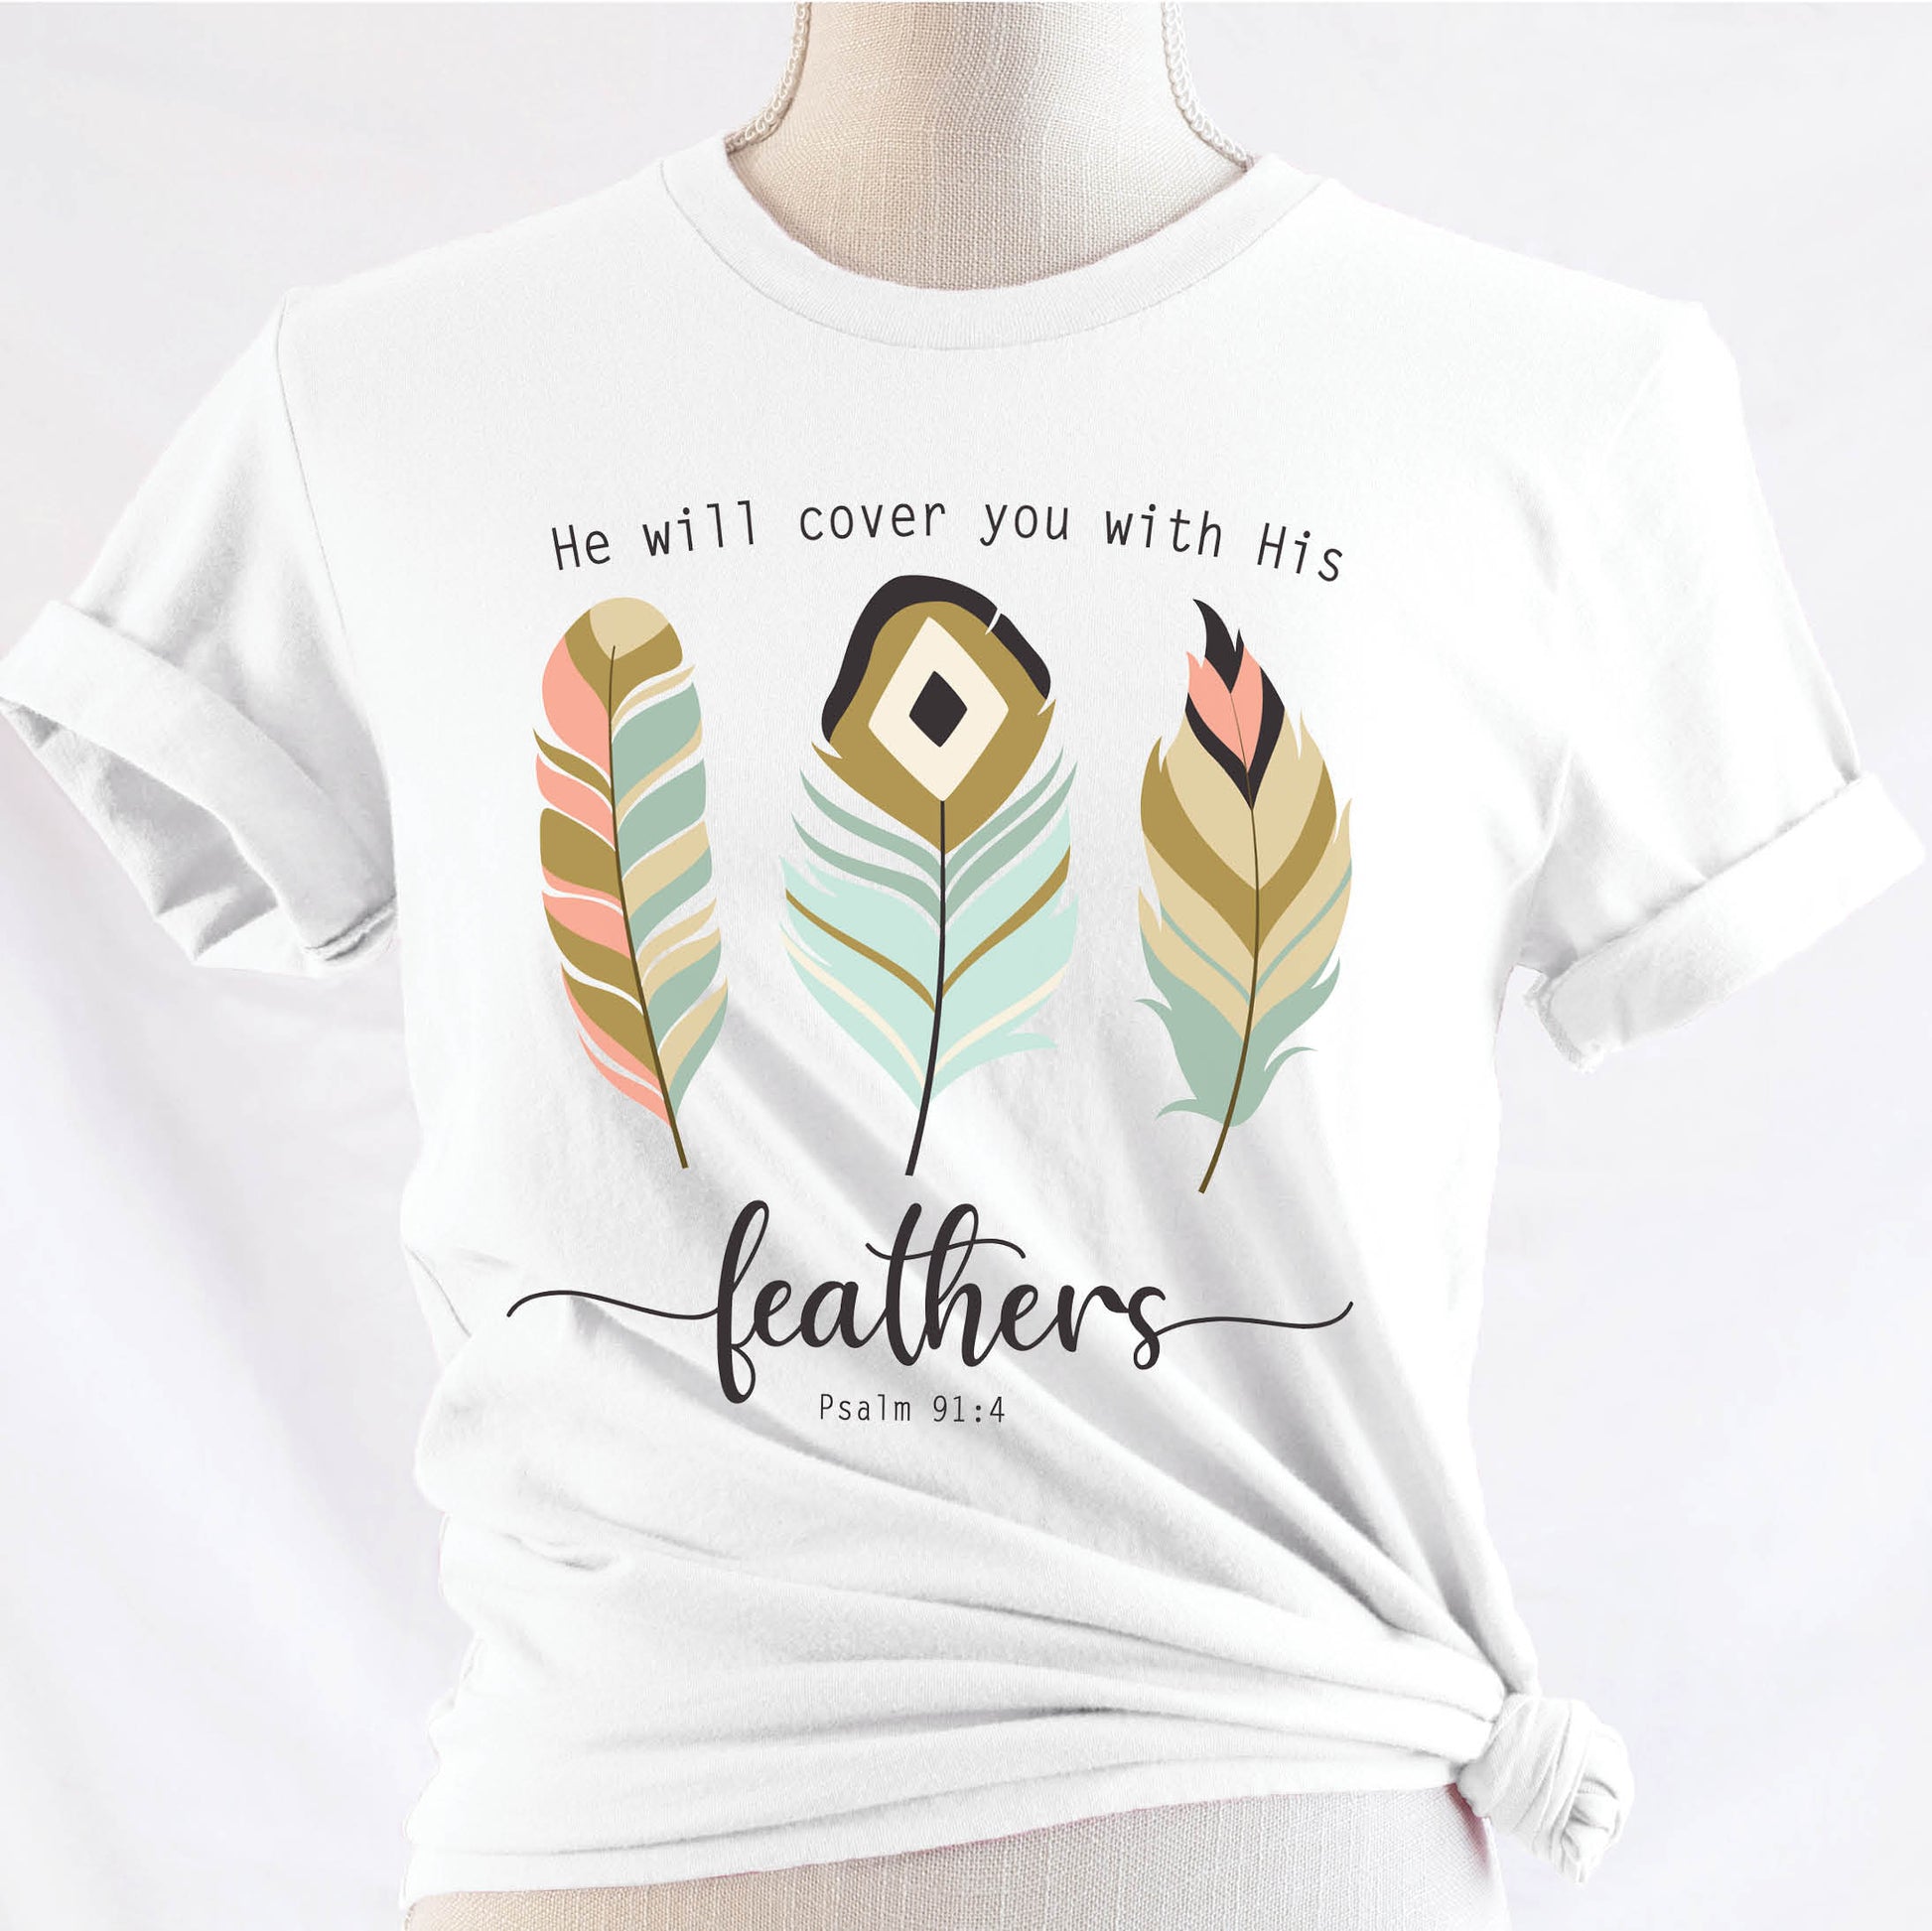 Psalm 91:4 "He Will Cover You With His Feathers" boho bible verse Christian woman aesthetic with teal peach and gold feathers printed on soft white unisex t-shirt for women